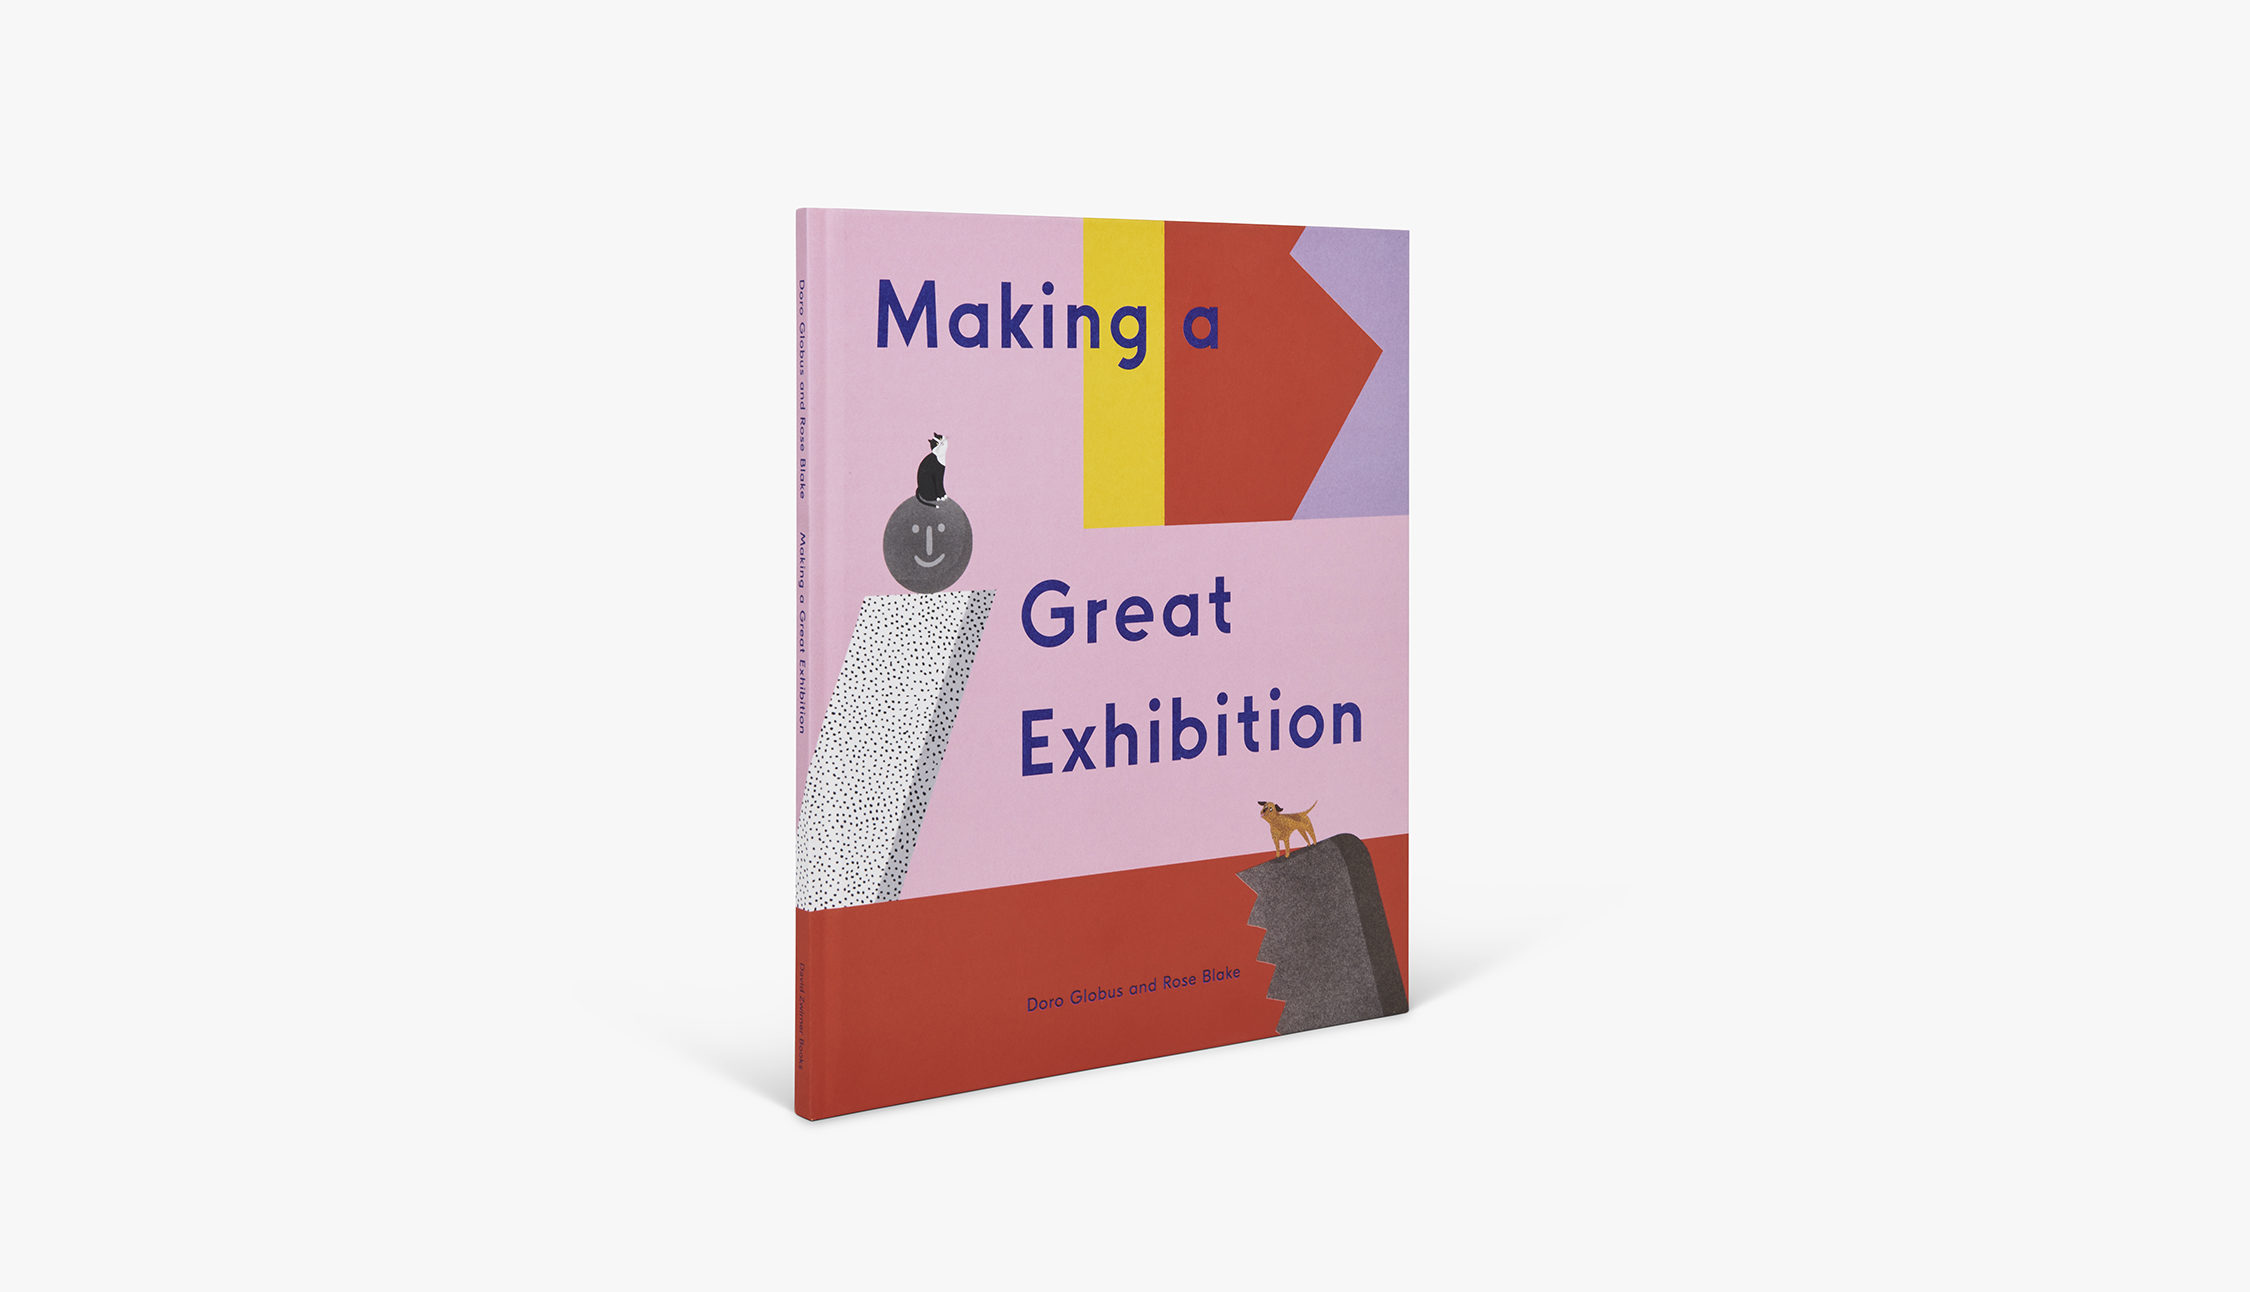 Virtual | ‘Making a Great Exhibition’ – A New Children’s Book by Doro Globus, with Genevieve Martin